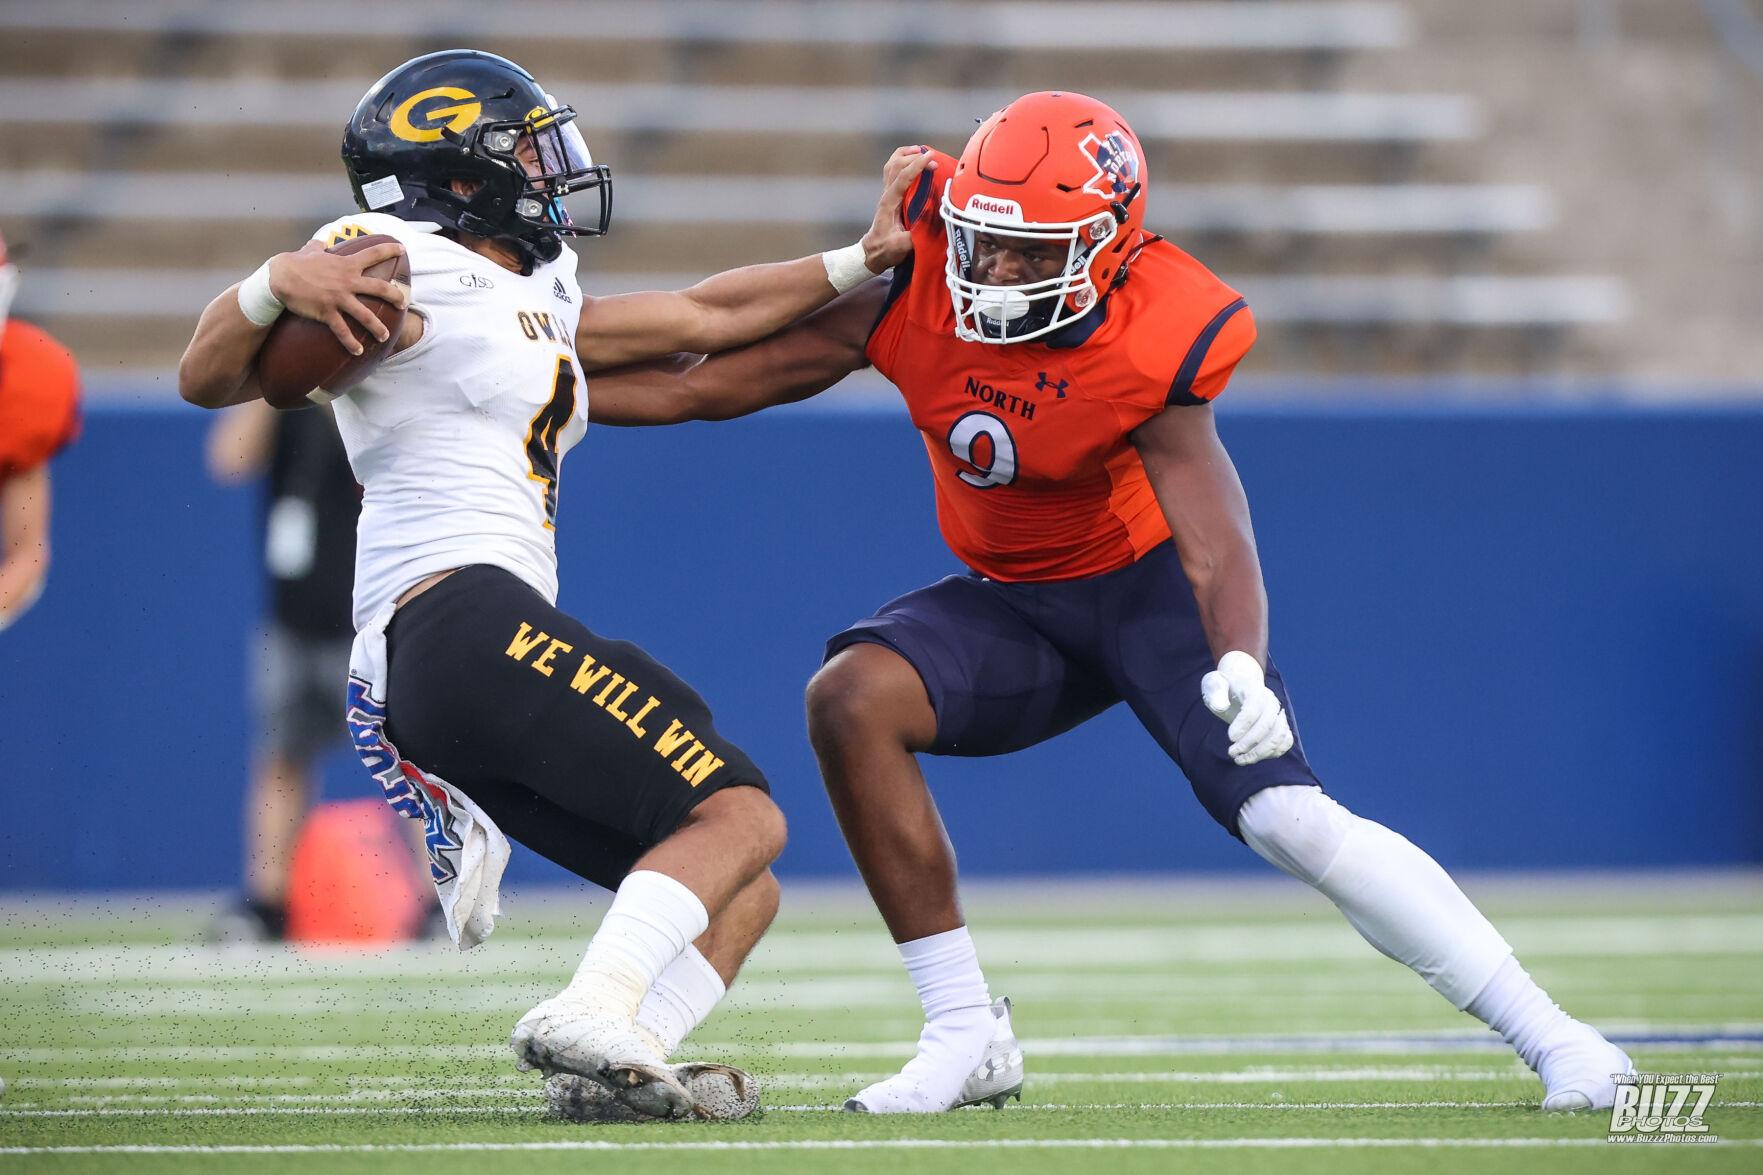 Check out the top photos from all three of McKinney ISD football's